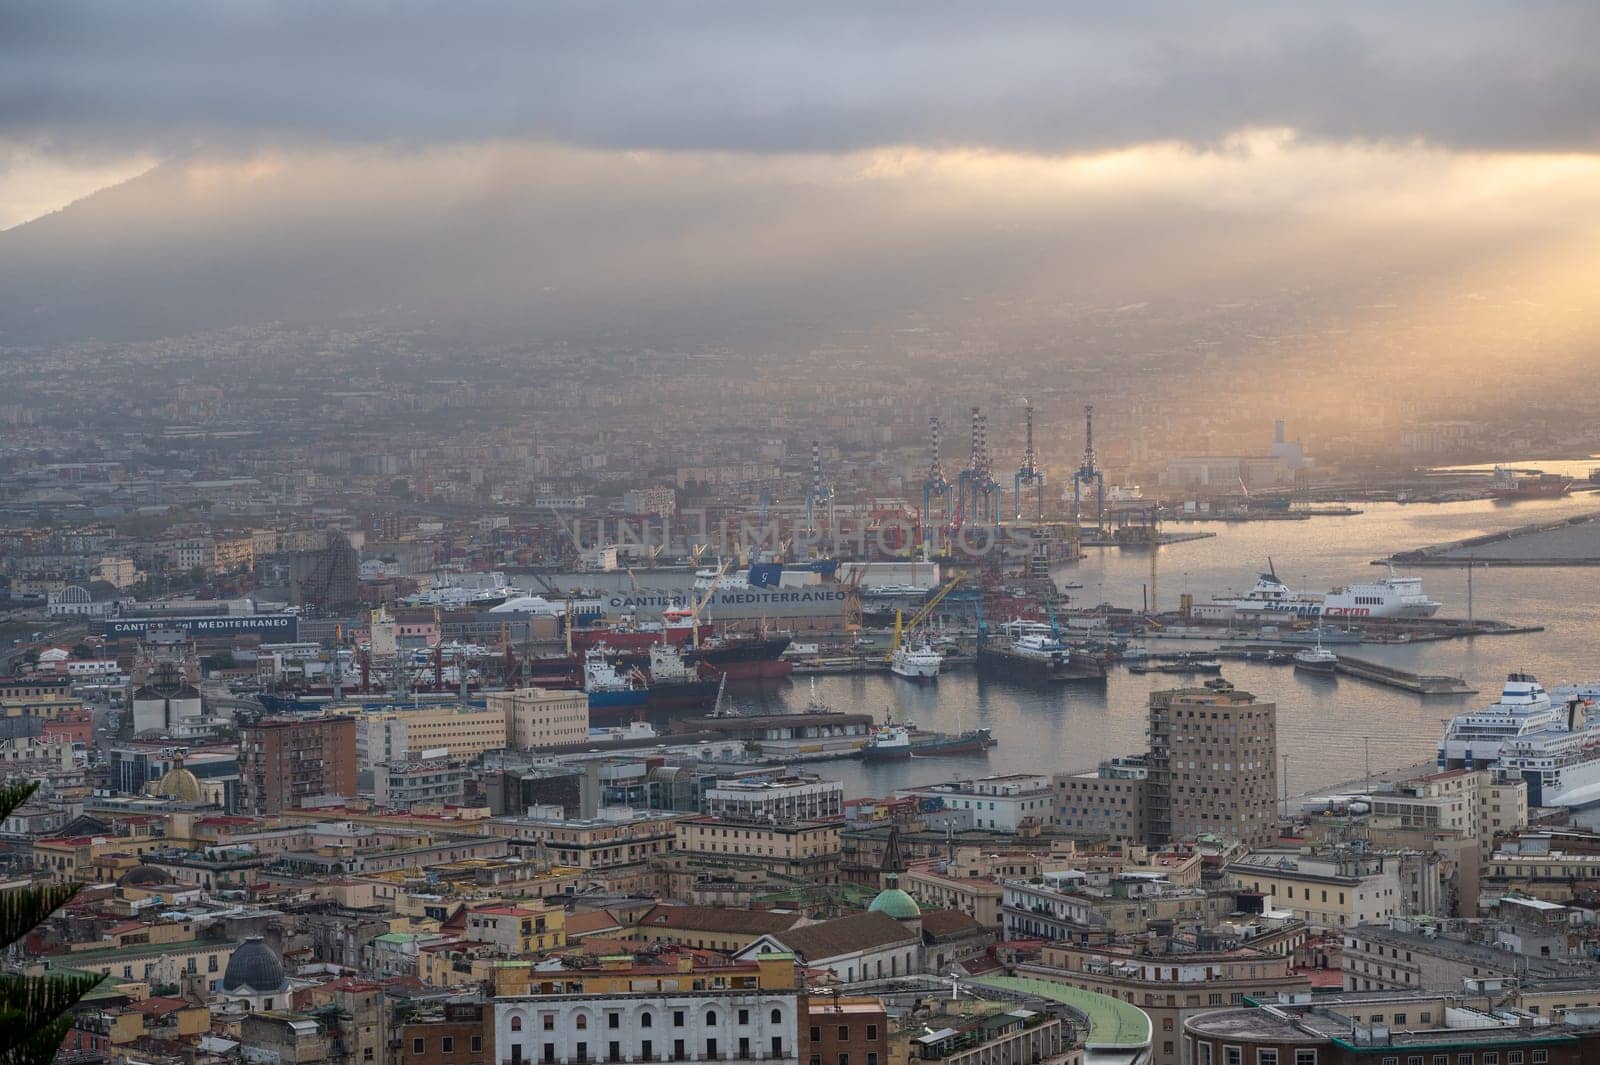 Panorama of the sea port of the city of Napoli in the morning with Vesuvius in the background.